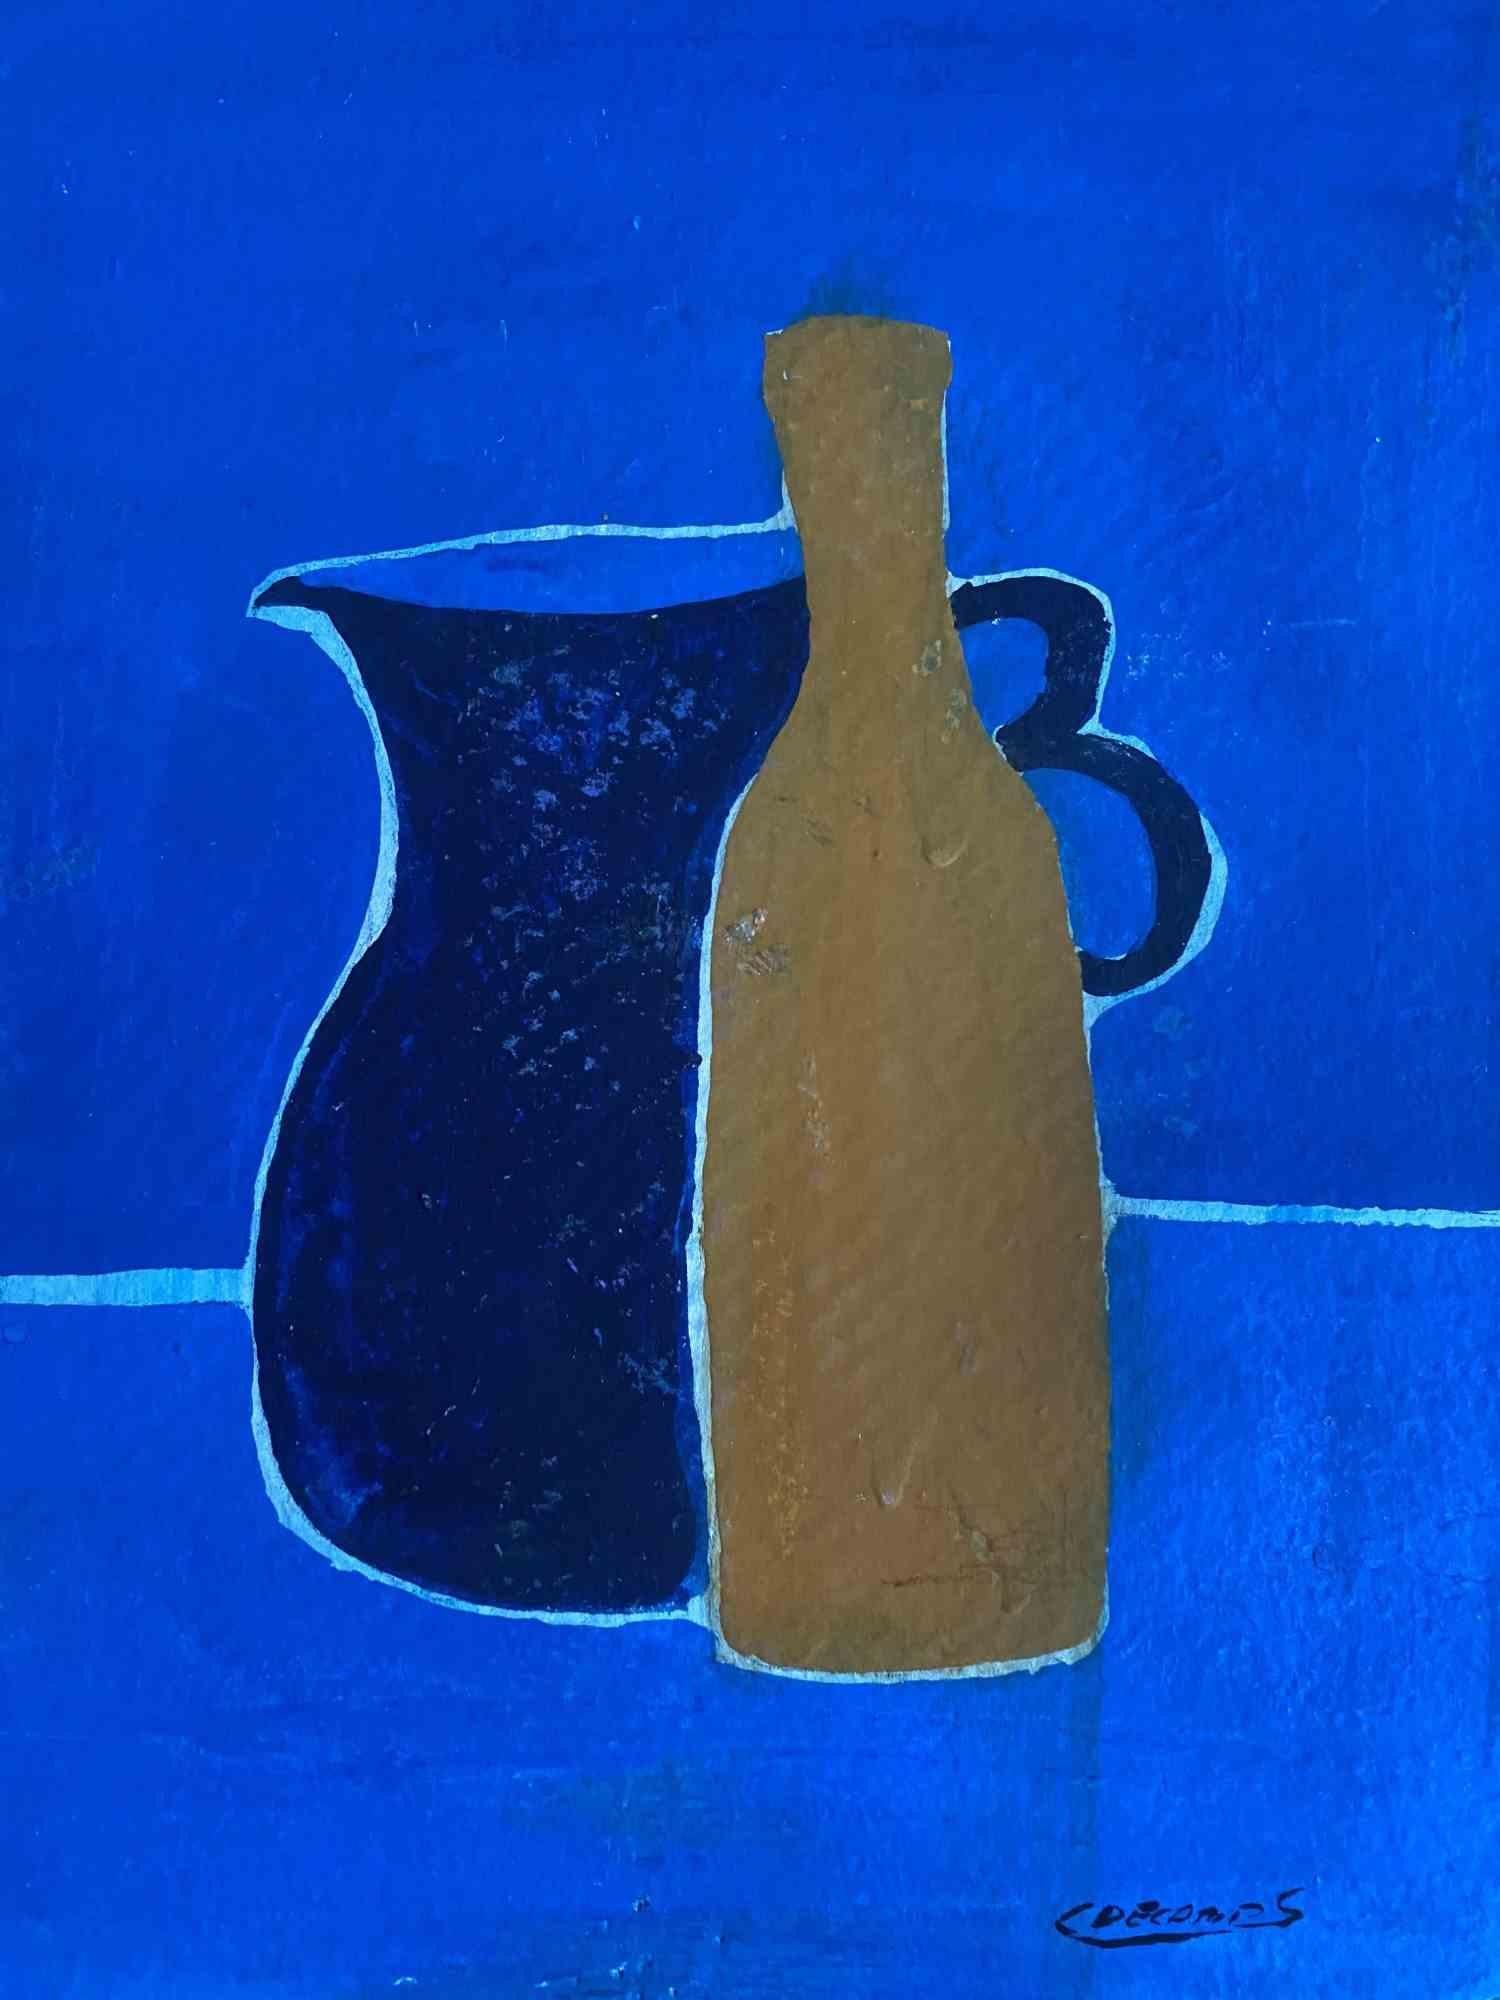 The Still Life is a painting realized by Claude Decamps in the 1970s

Oil painting on cardboard canvas.

Hand-signed on the lower.

Good conditions.

The artwork is represented through soft brush strokes smoothly, with harmonious and congruent